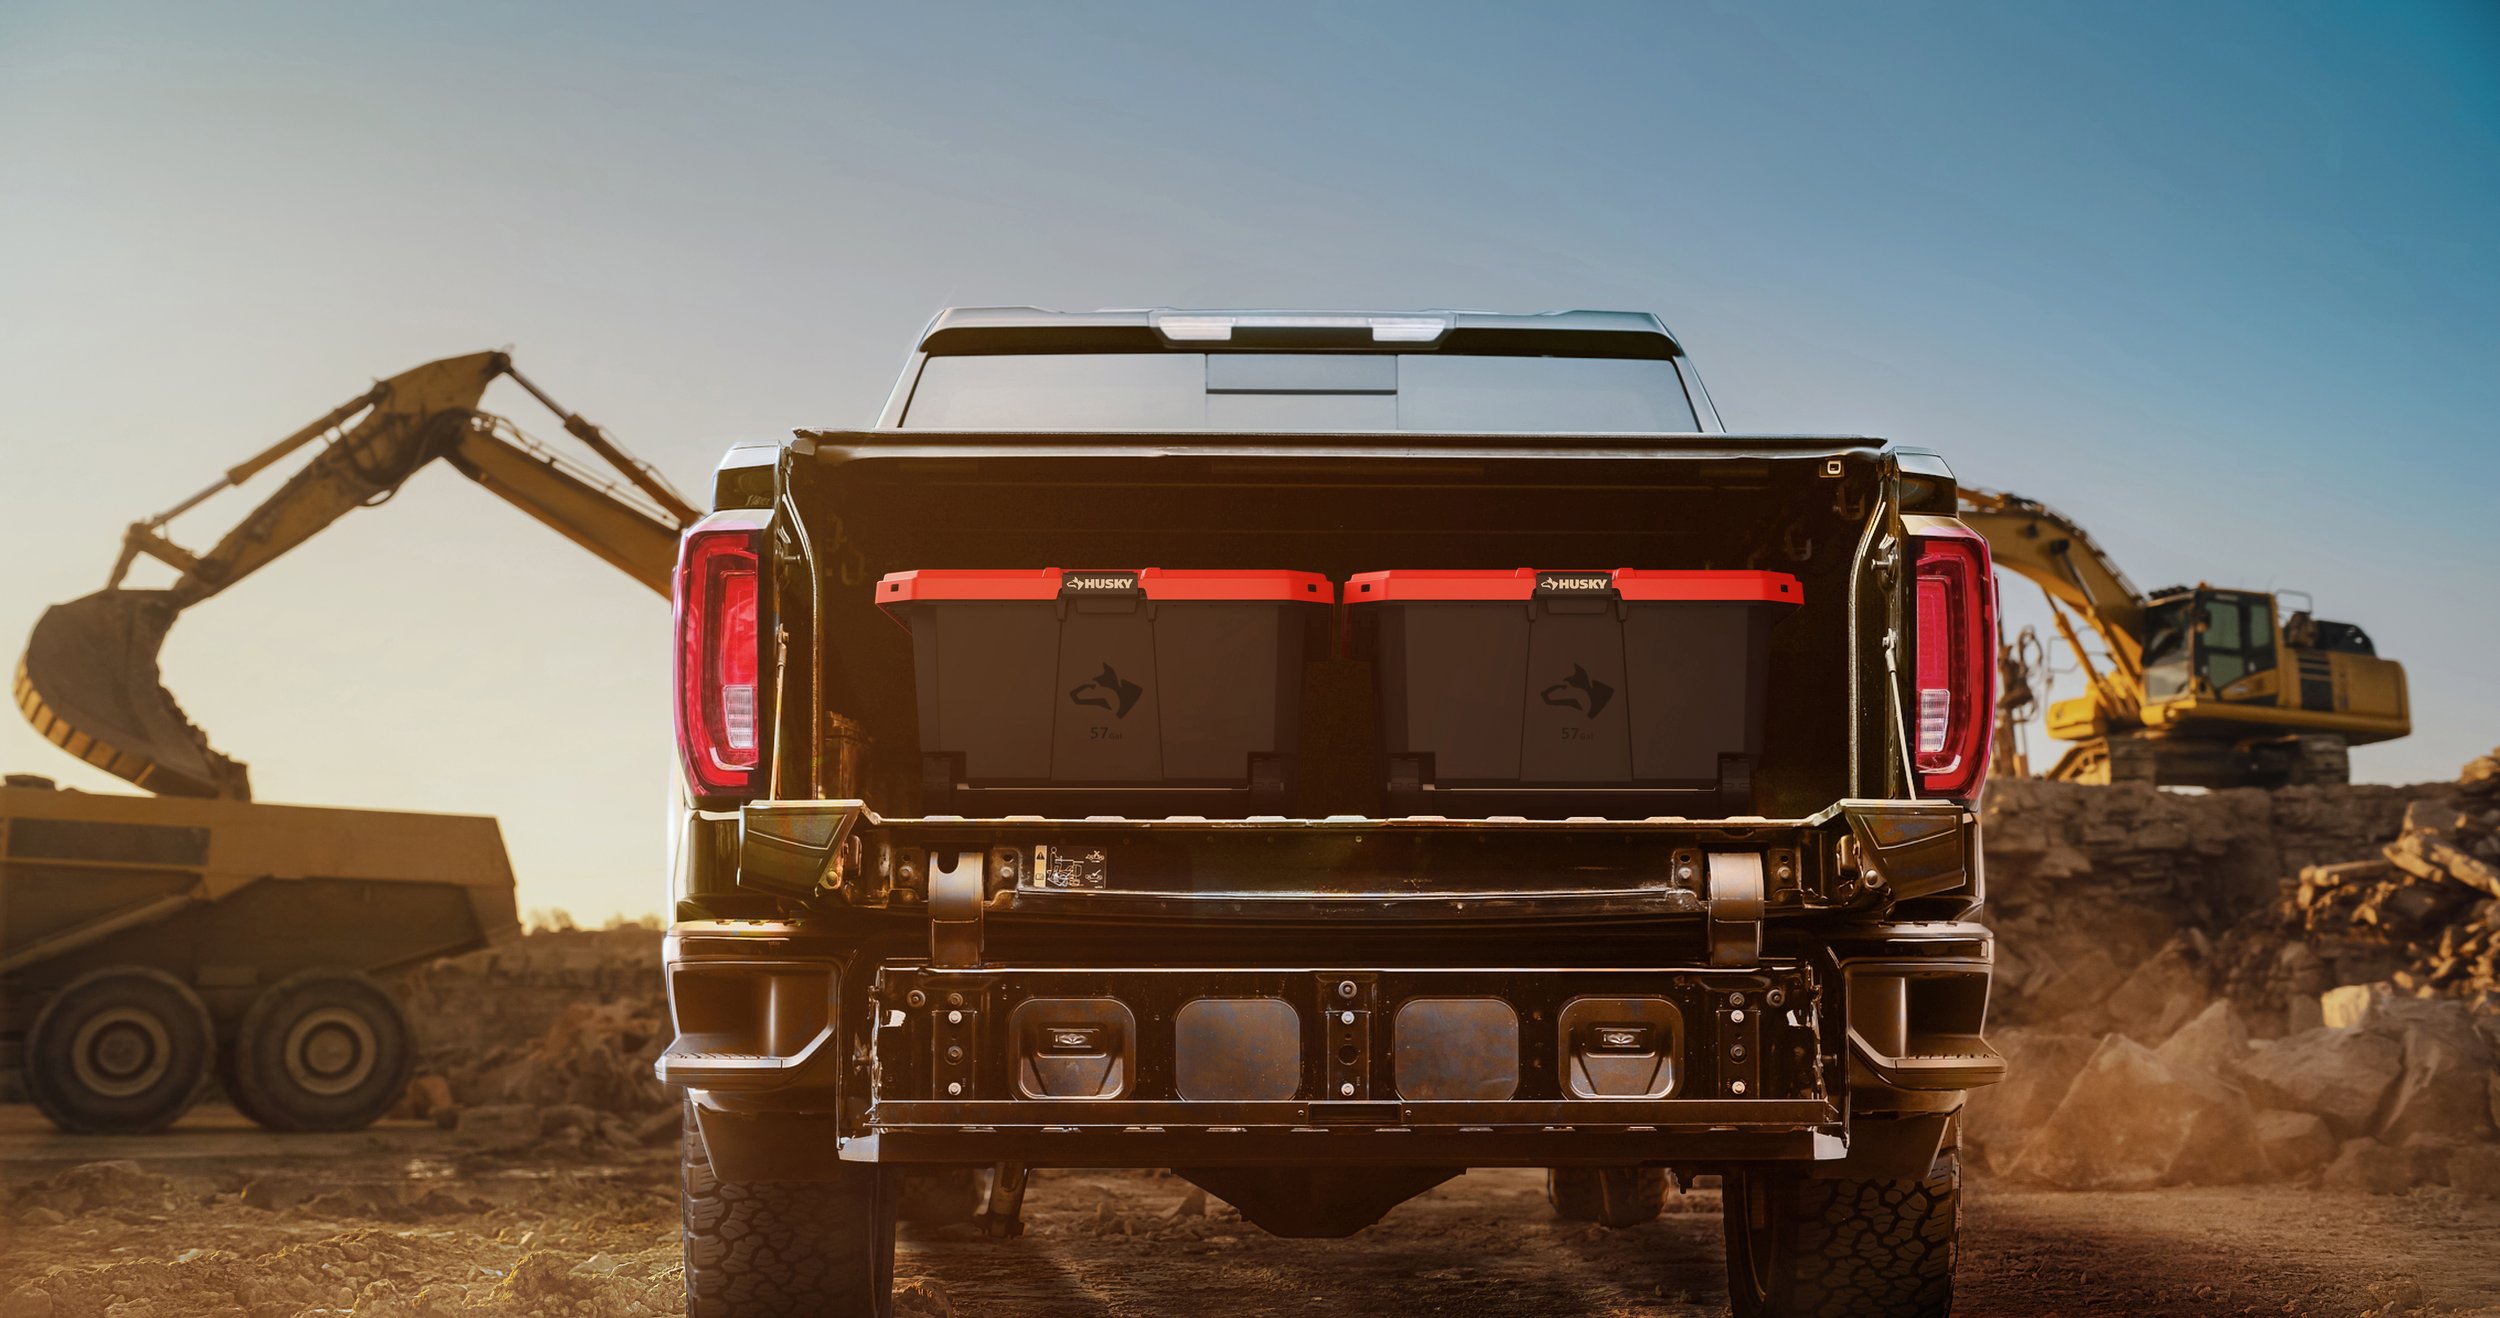 Showcase the efficient storage capabilities in a standard pickup truck